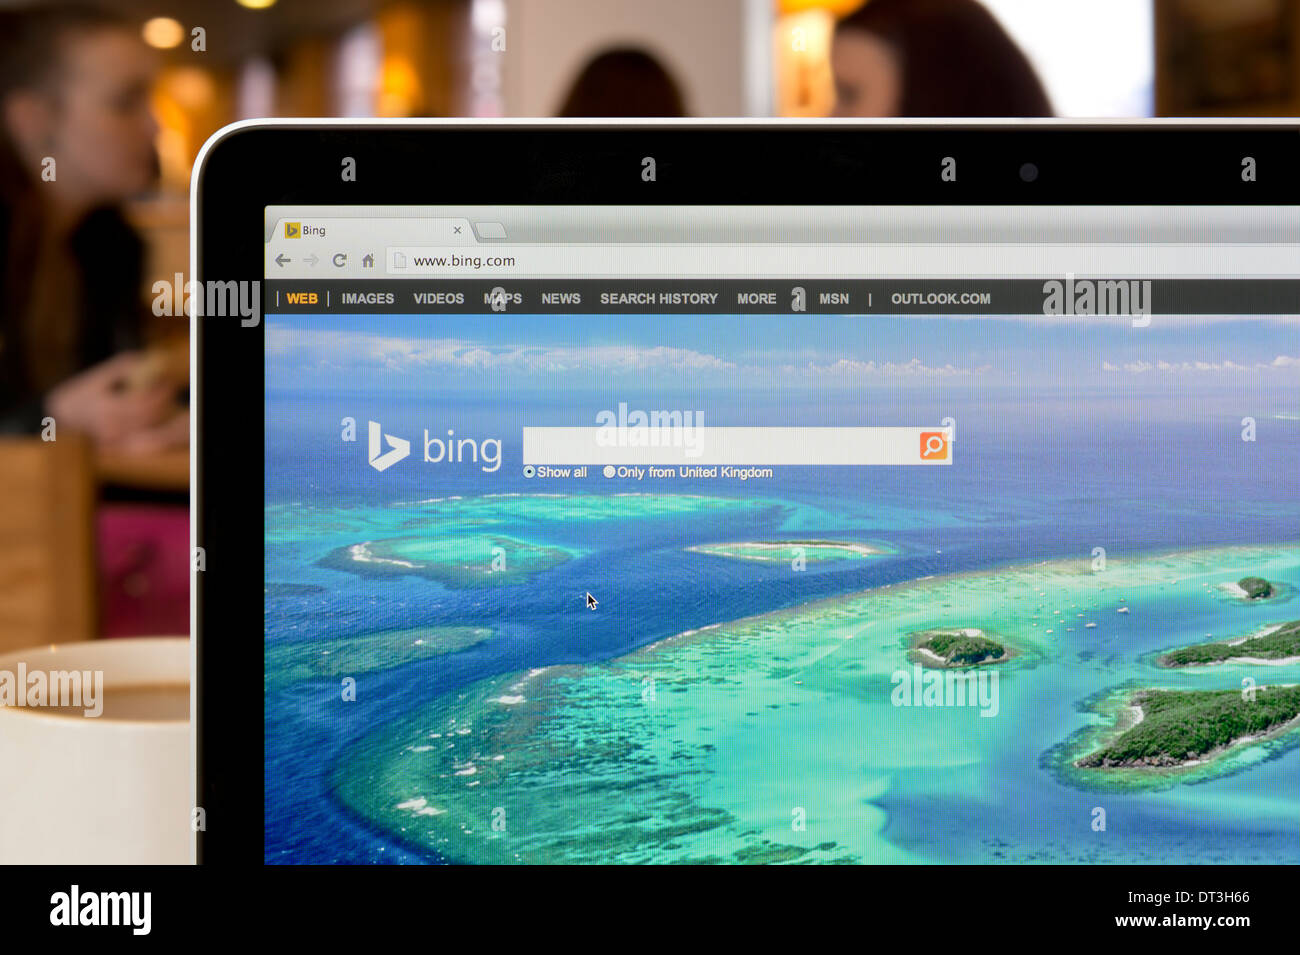 The Bing website shot in a coffee shop environment (Editorial use only: print, TV, e-book and editorial website). Stock Photo